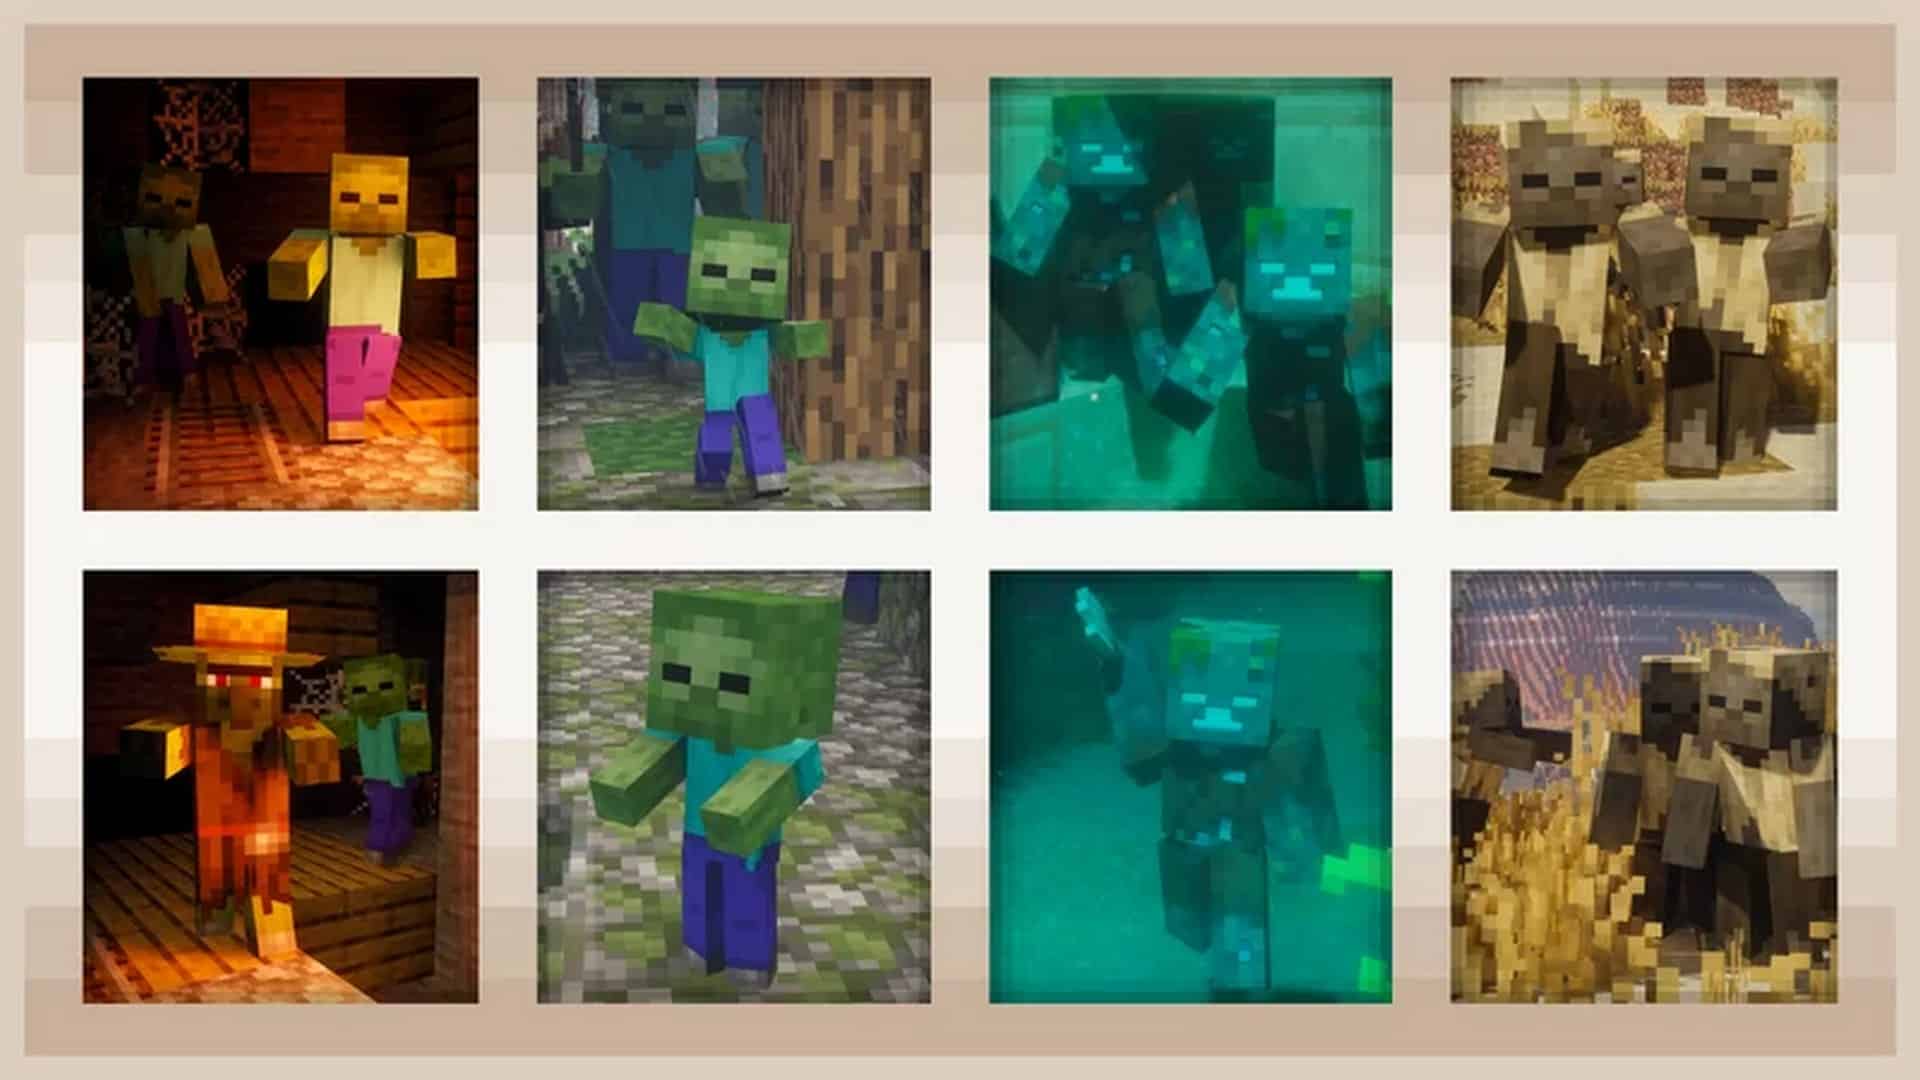 minecraft better animations resource pack